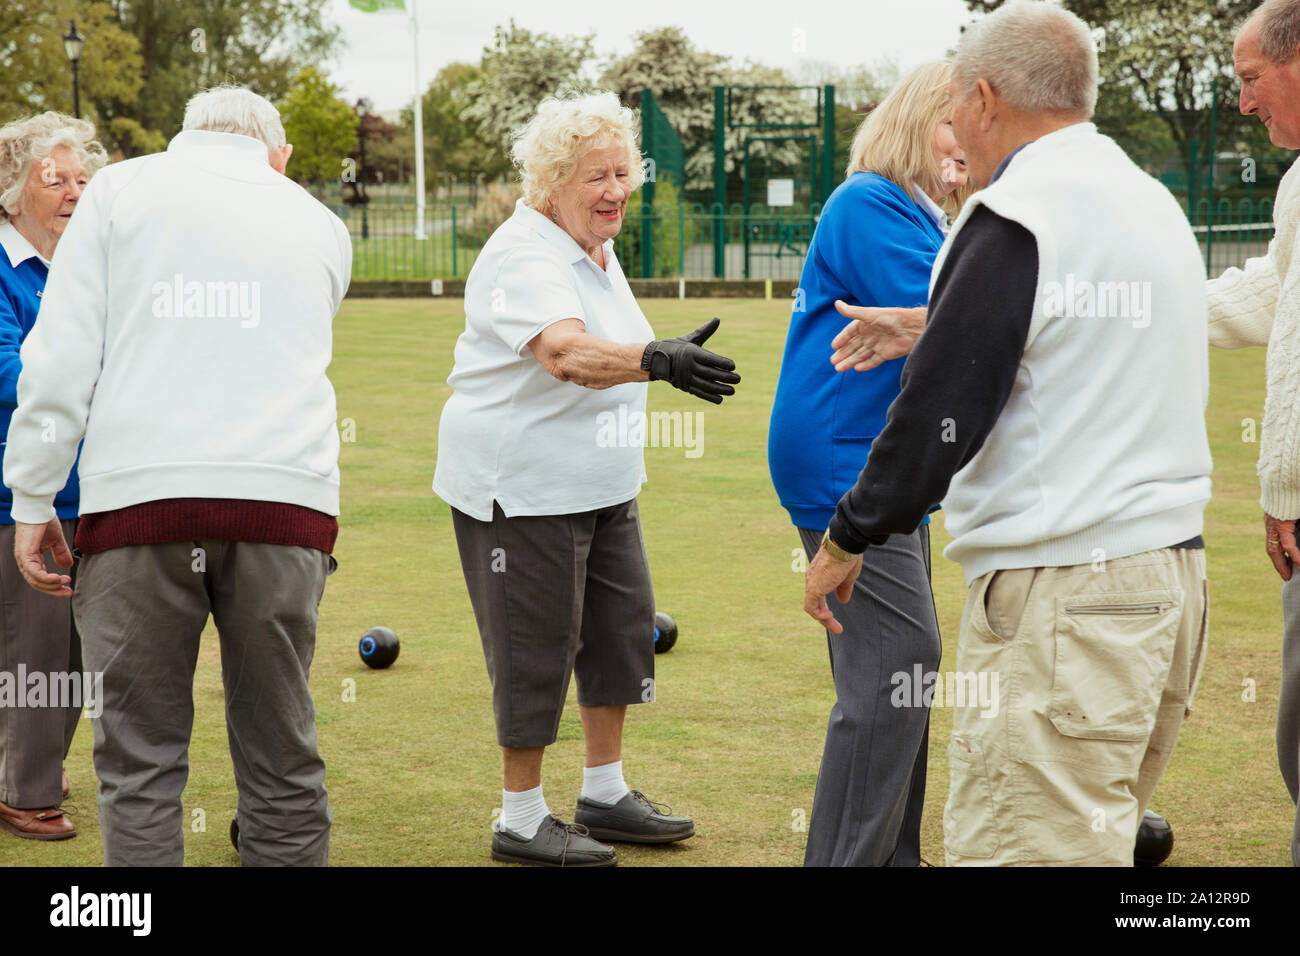 Senior adults shaking eachother's hands after a lawn bowling game, showing team spirit. Stock Photo